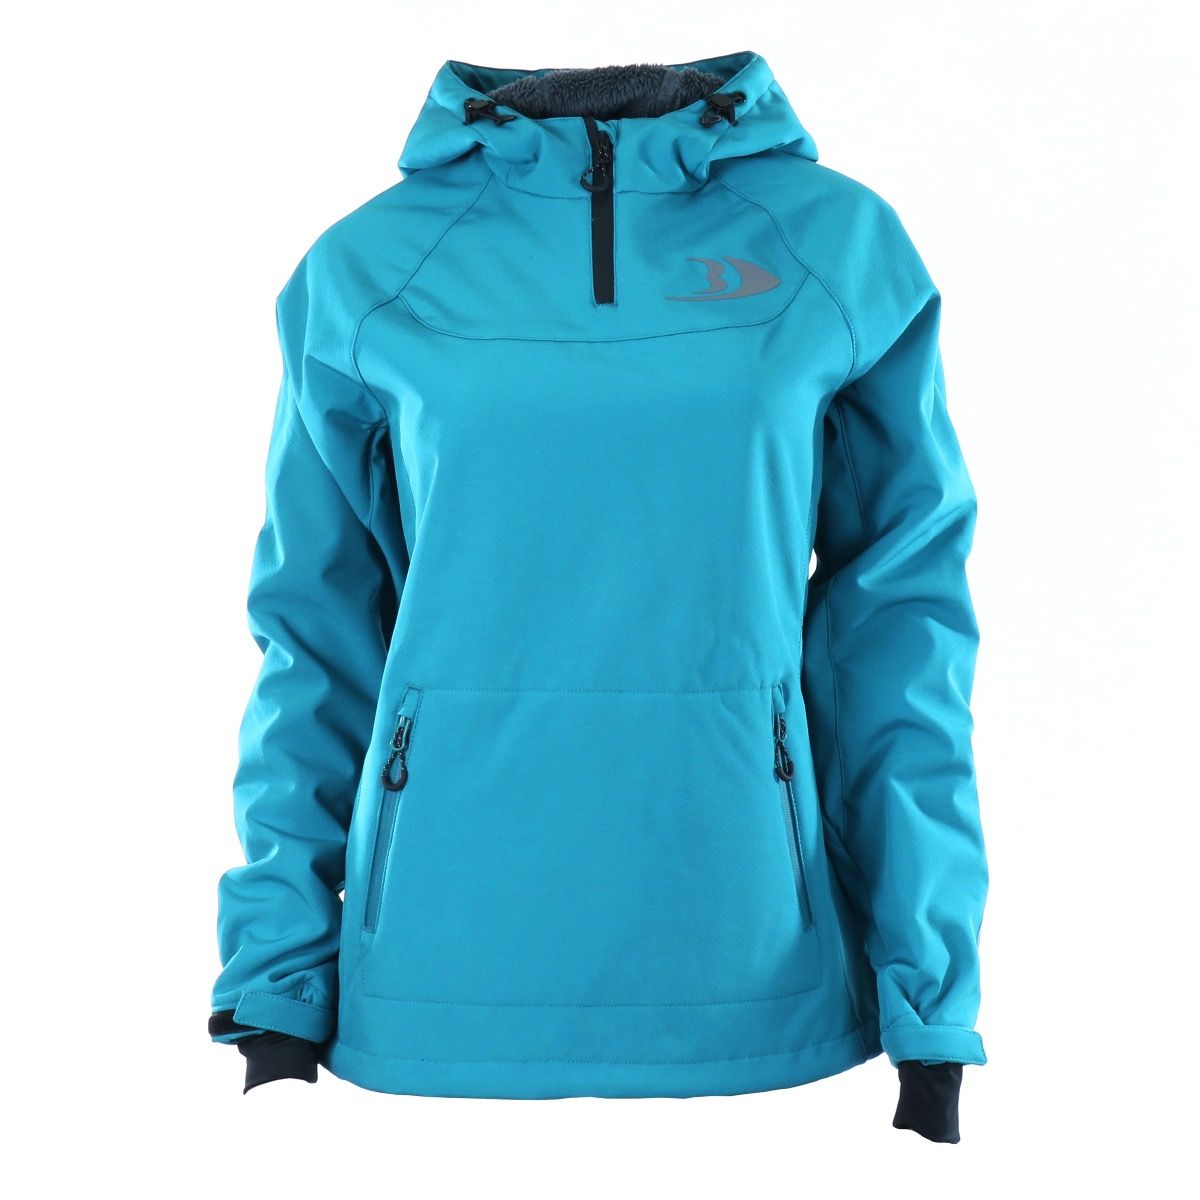 Blackfish Women's Squall Softshell Pullover (Small/Teal) 14762, Teal